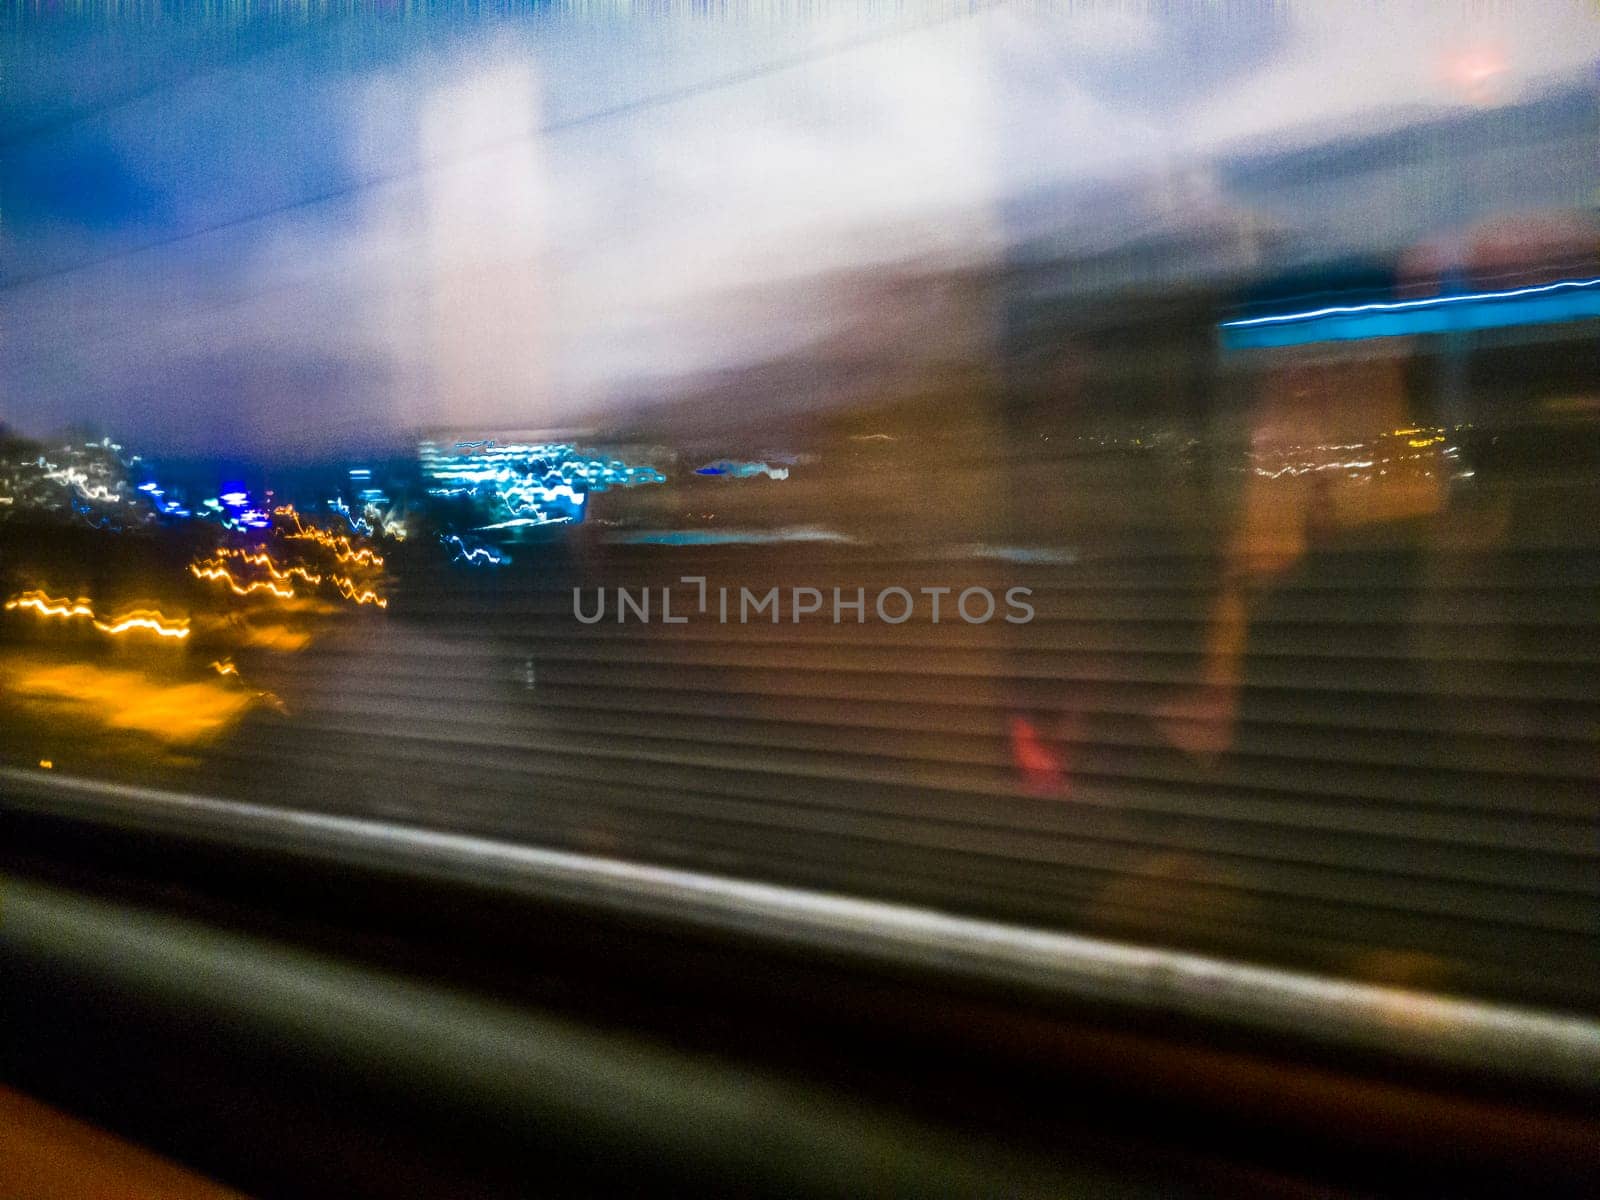 Conceptual shot of the light trails captured from the window of the moving train